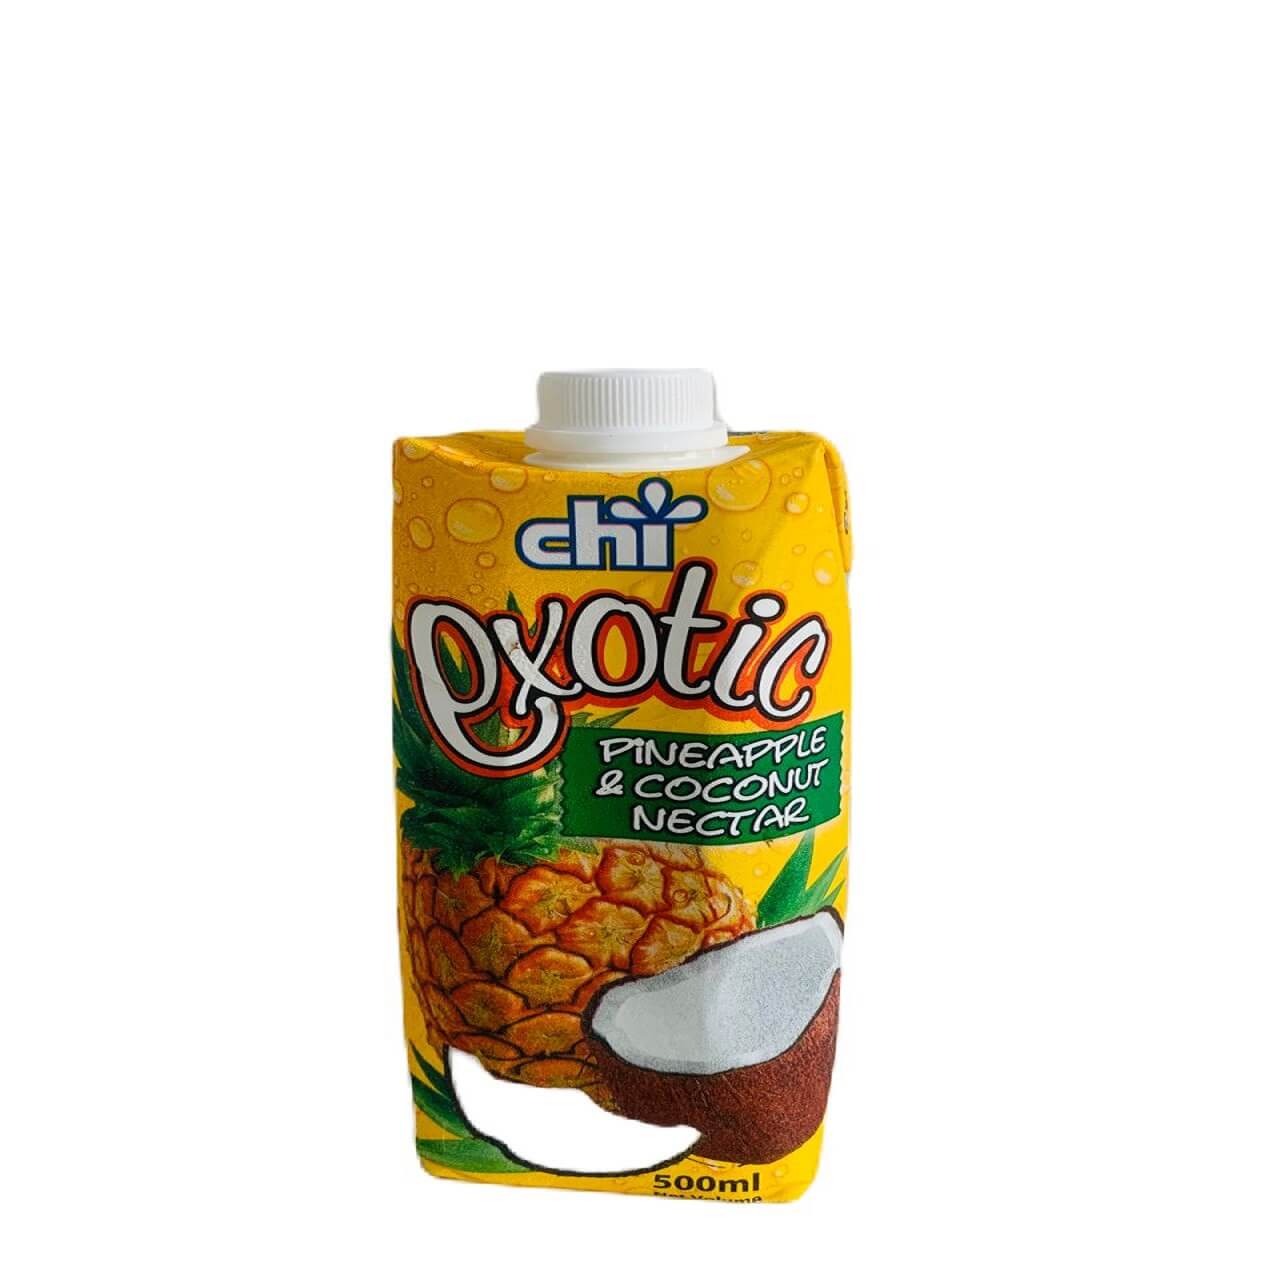 A box of 500ml of chi exotic